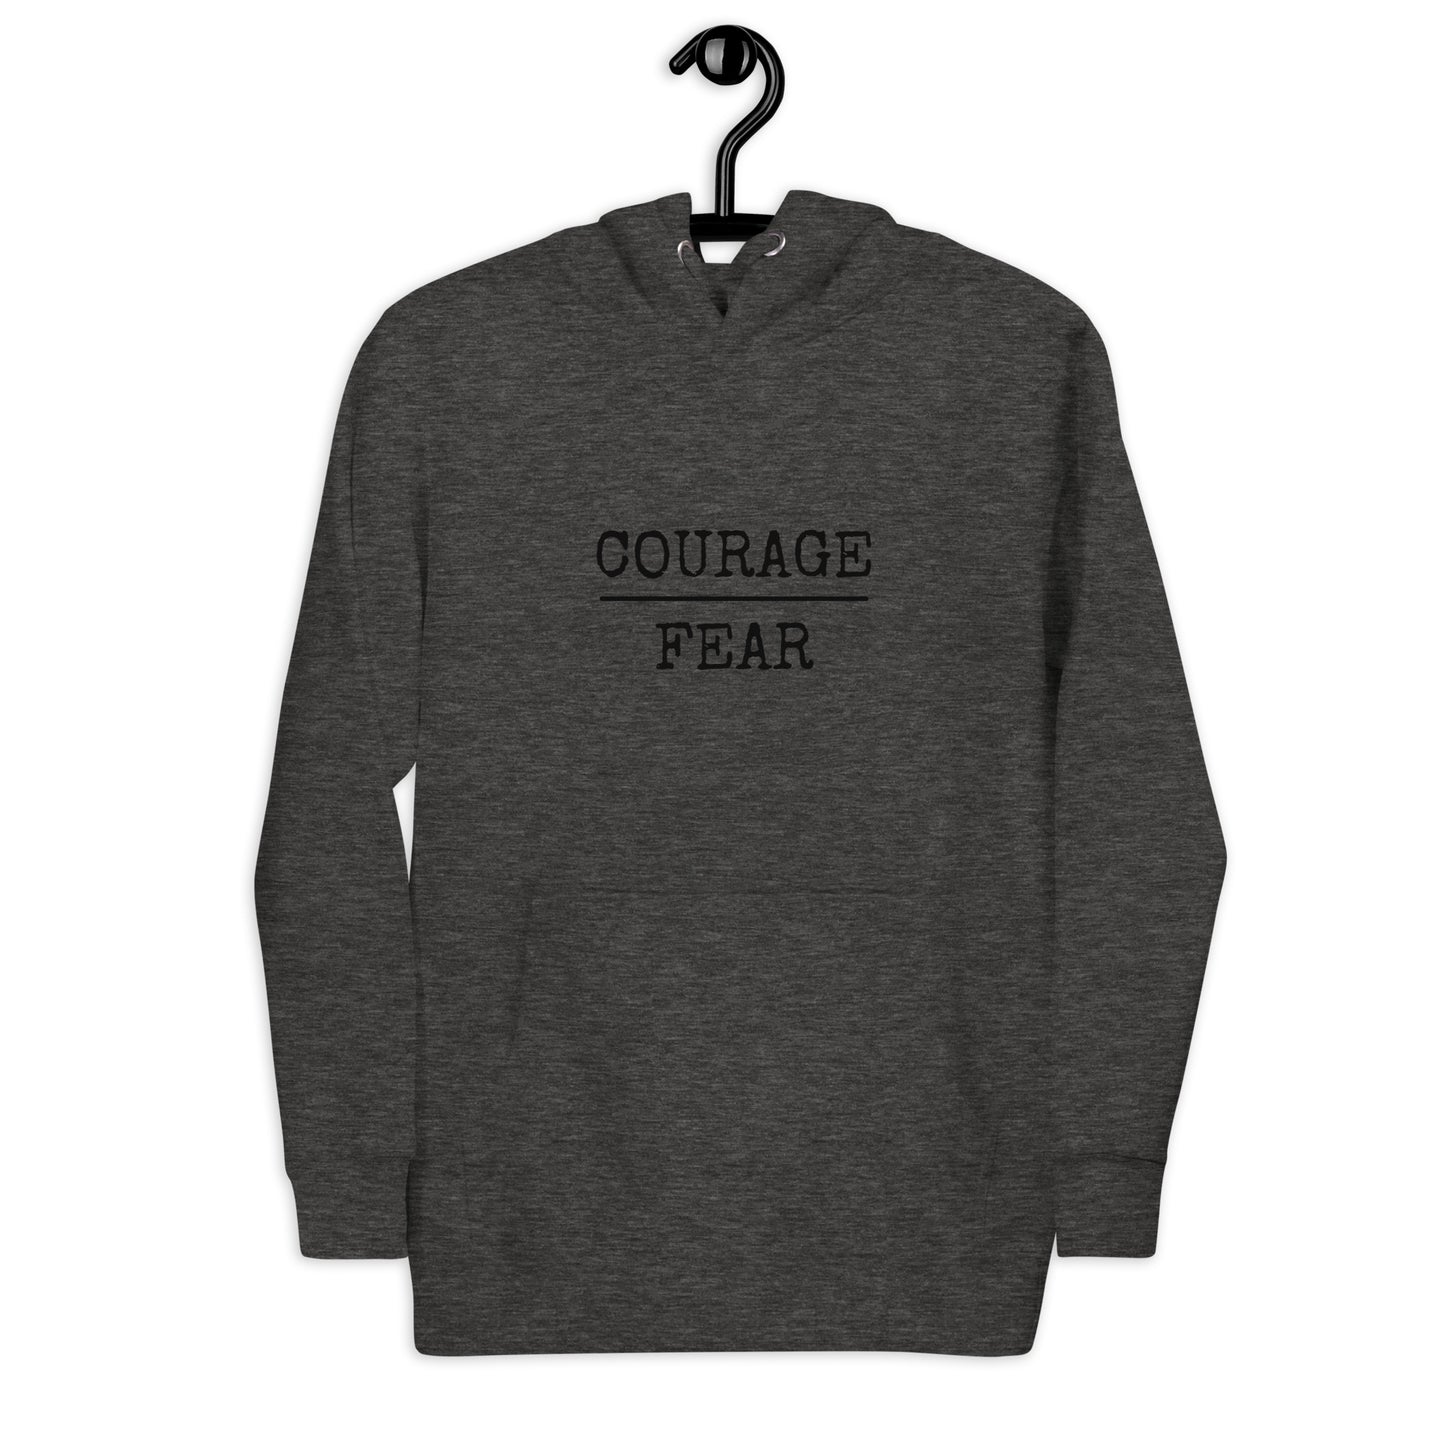 COURAGE/FEAR Hoodie